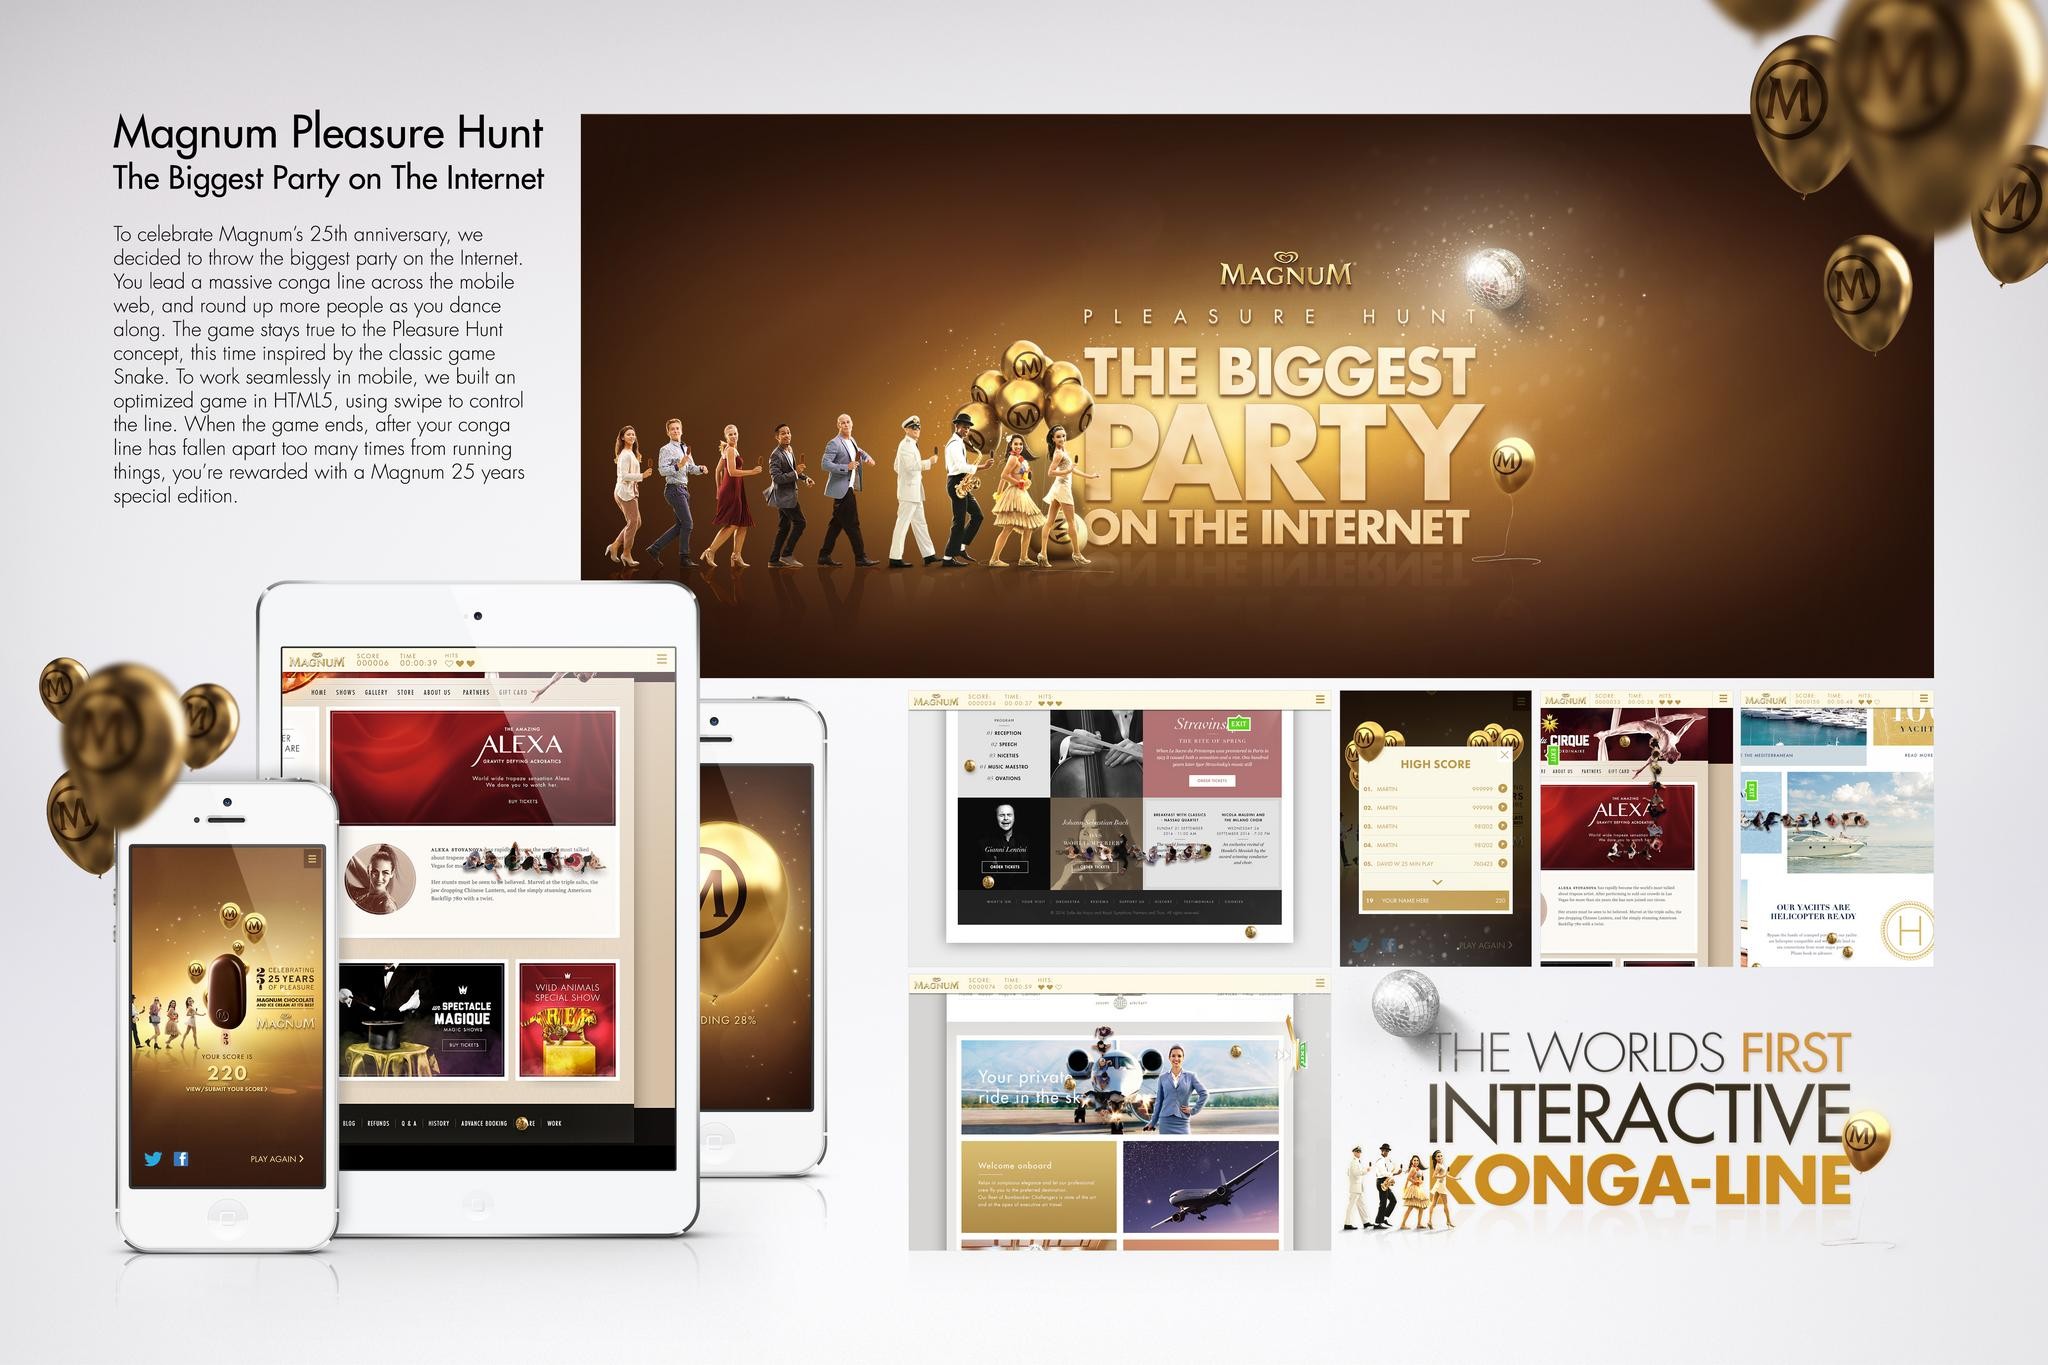 MAGNUM PLEASURE HUNT - THE BIGGEST PARTY ON THE INTERNET